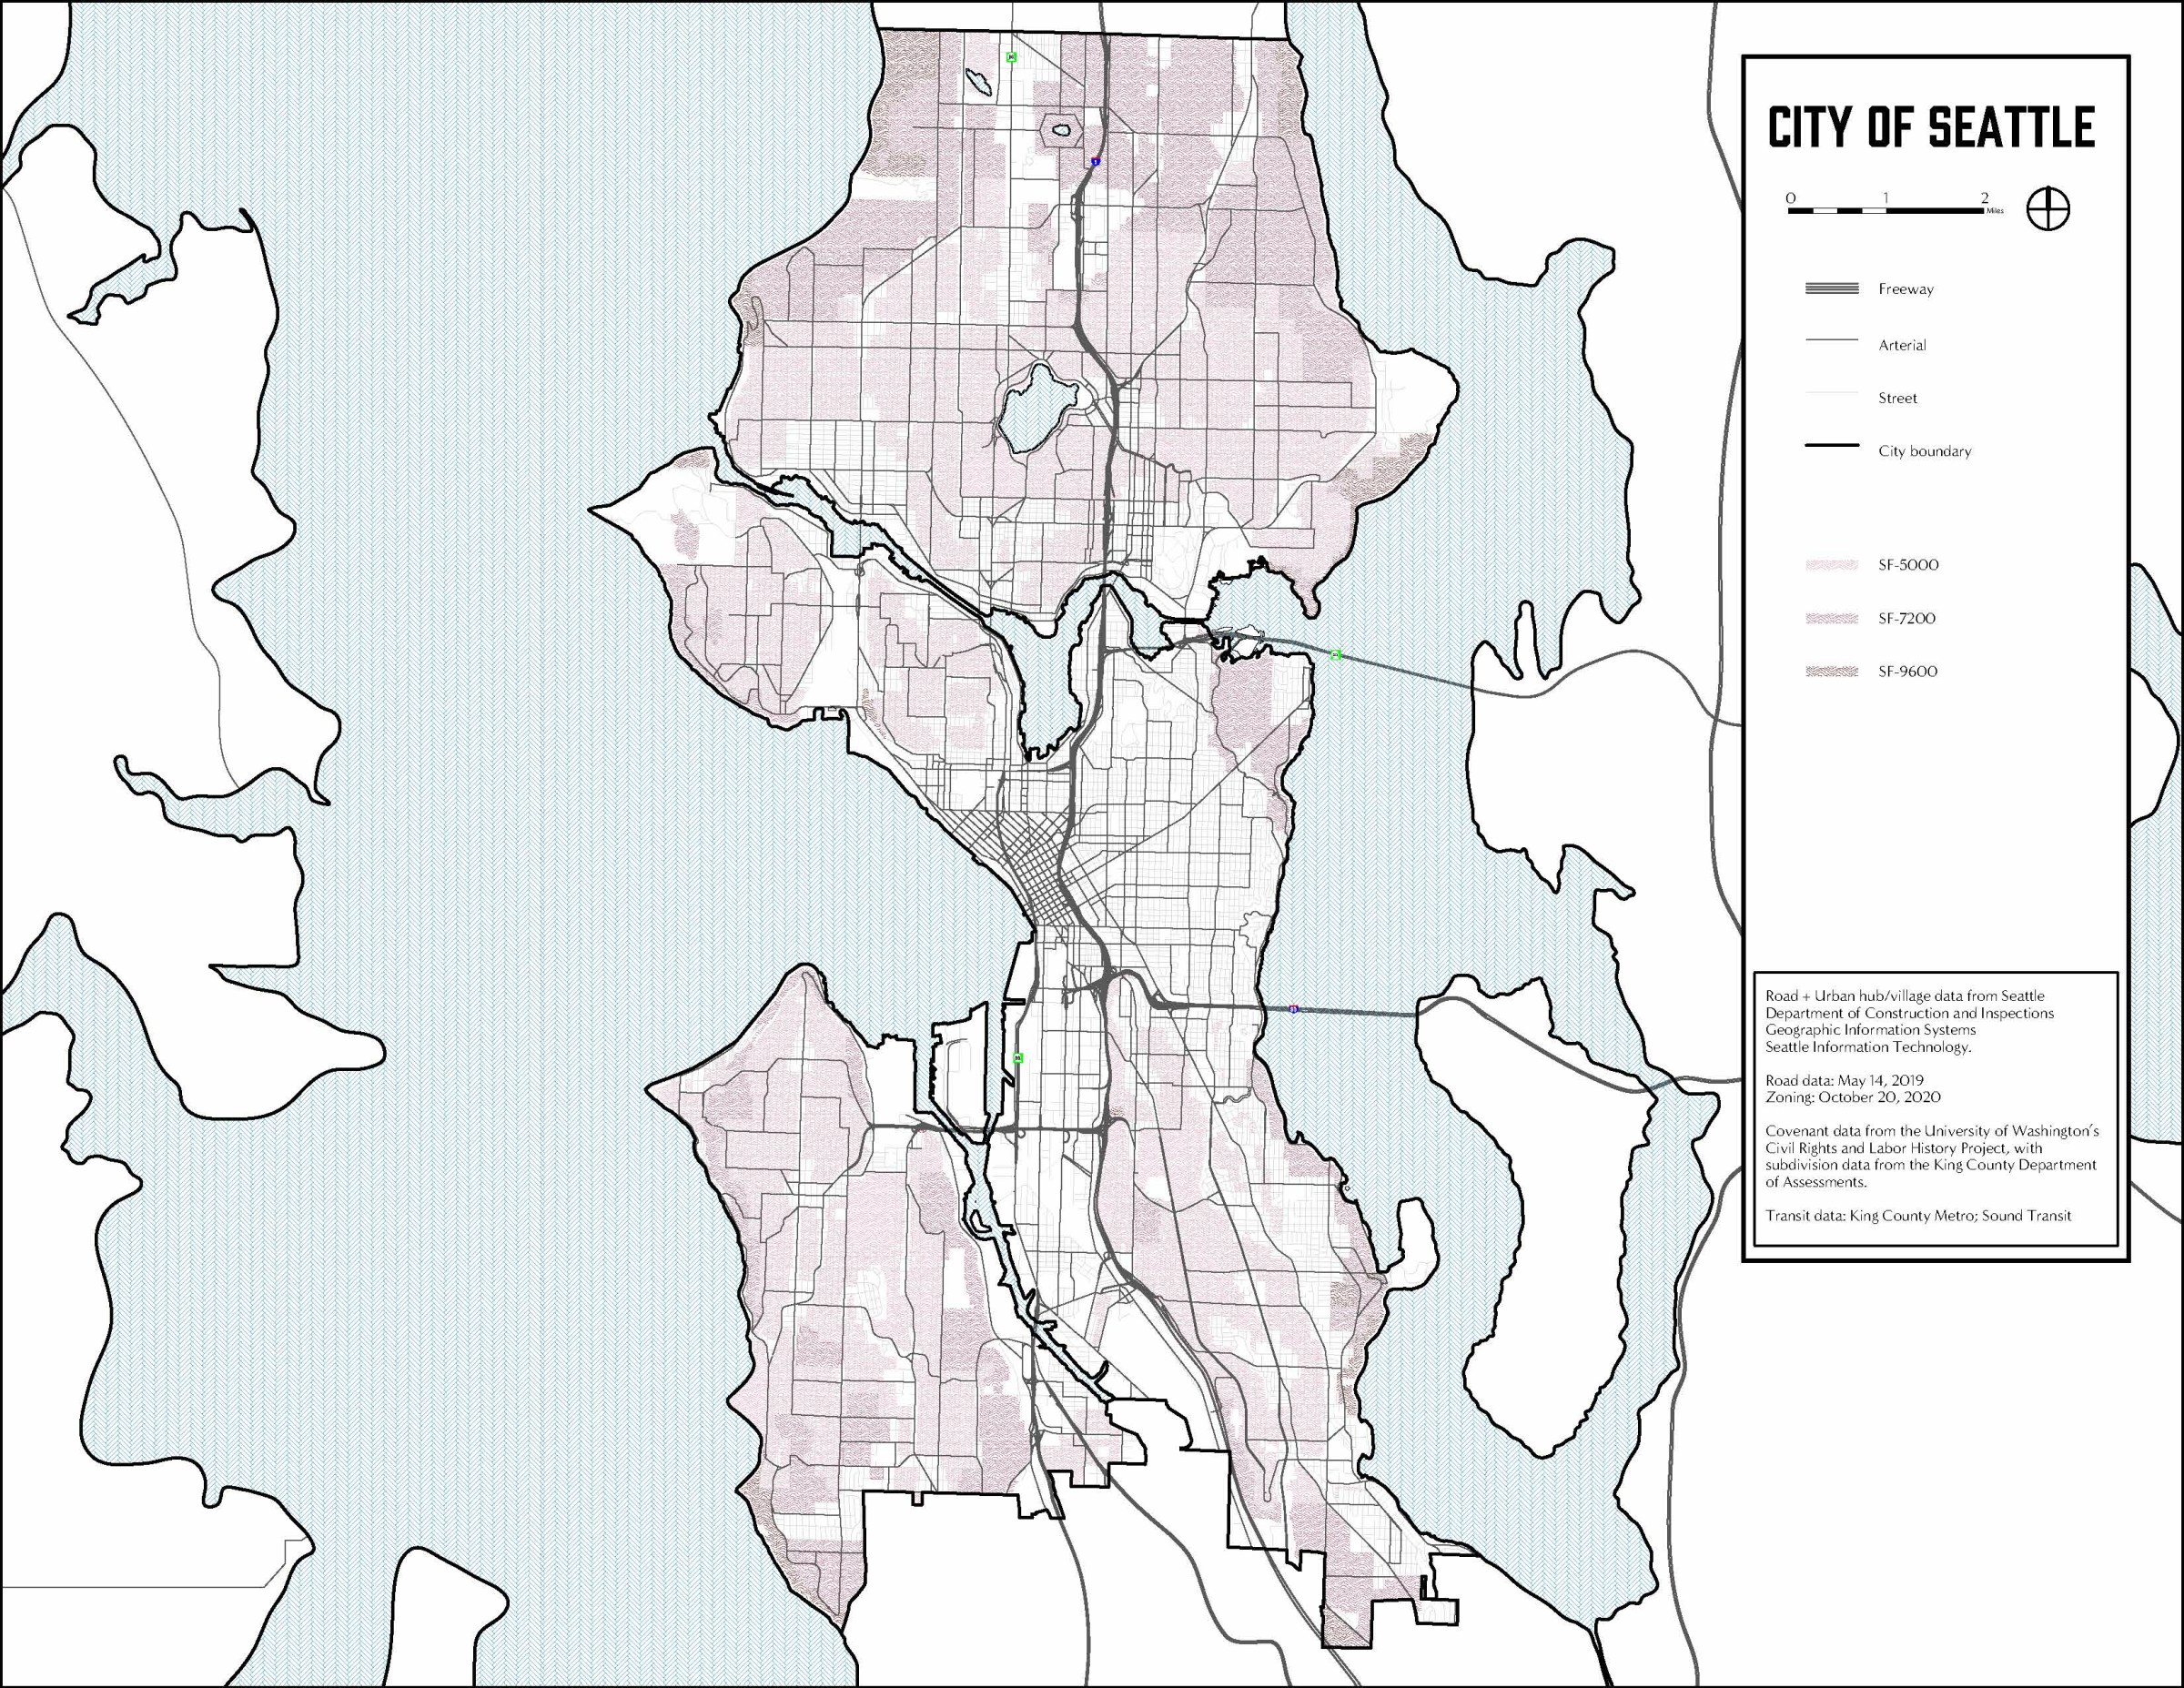 Zach Braaten's thesis project city of Seattle map